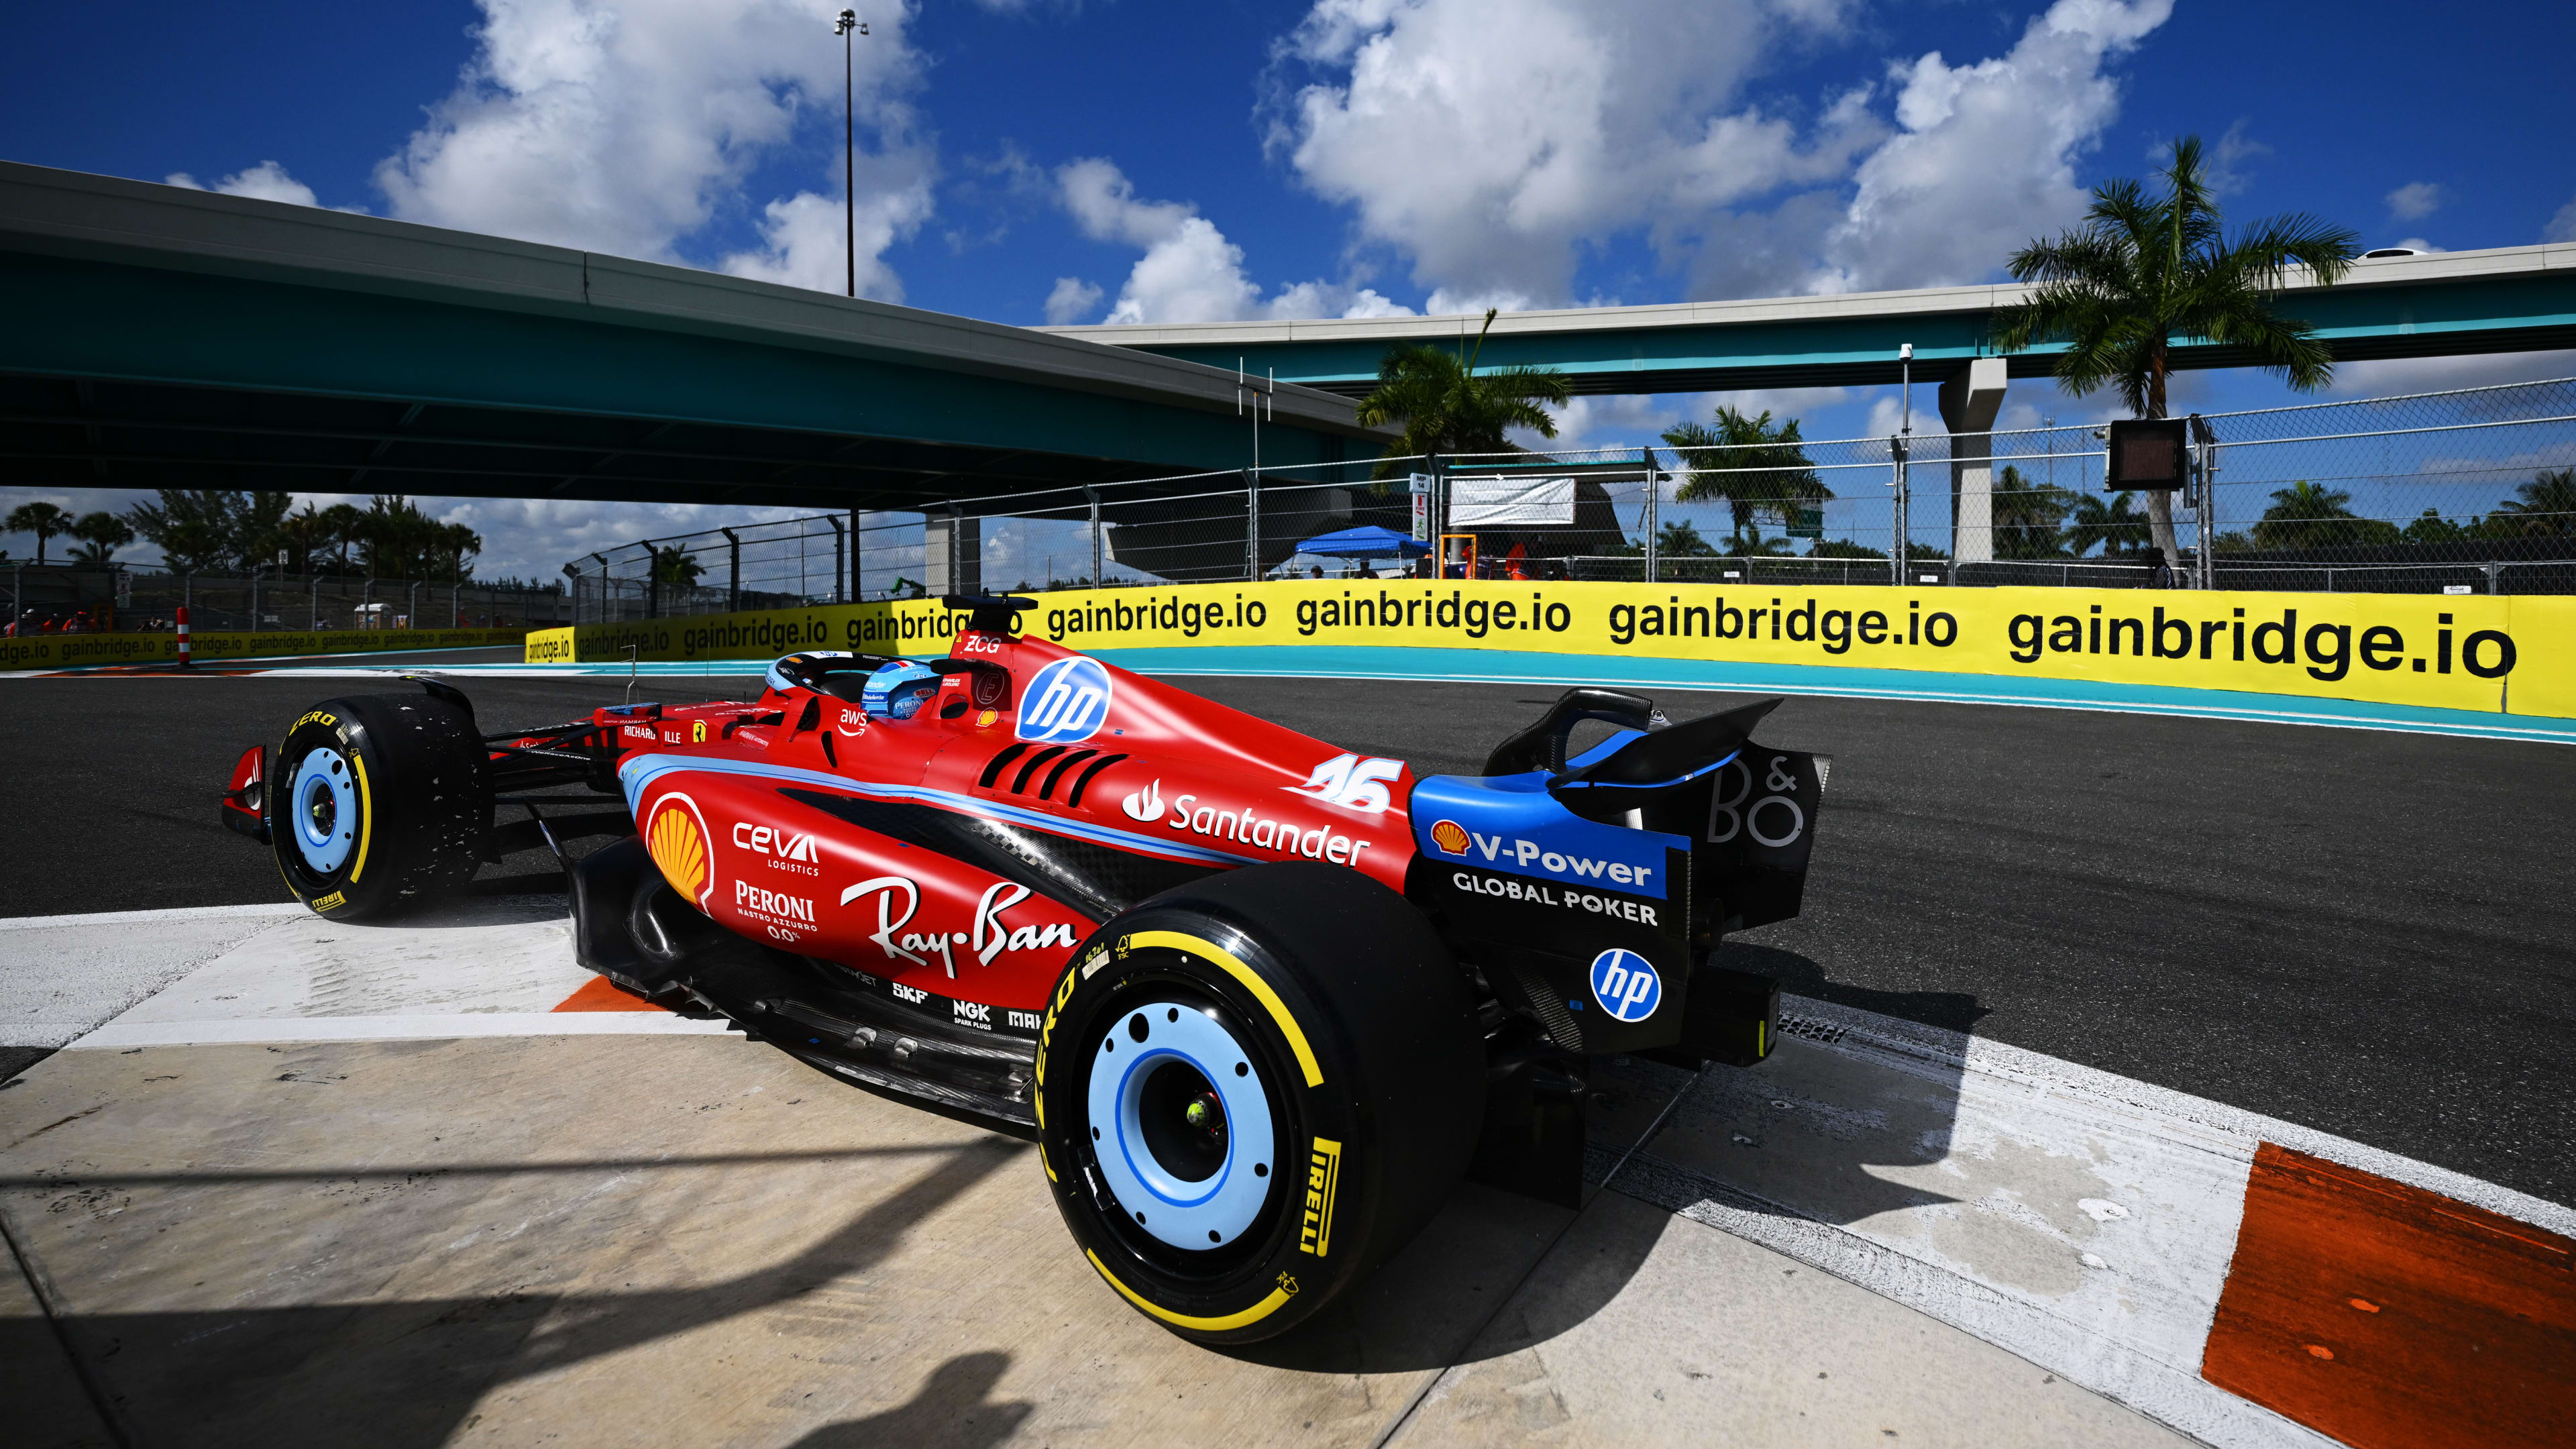 LIVE COVERAGE: Follow all the action from Sprint Qualifying at the Miami Grand Prix